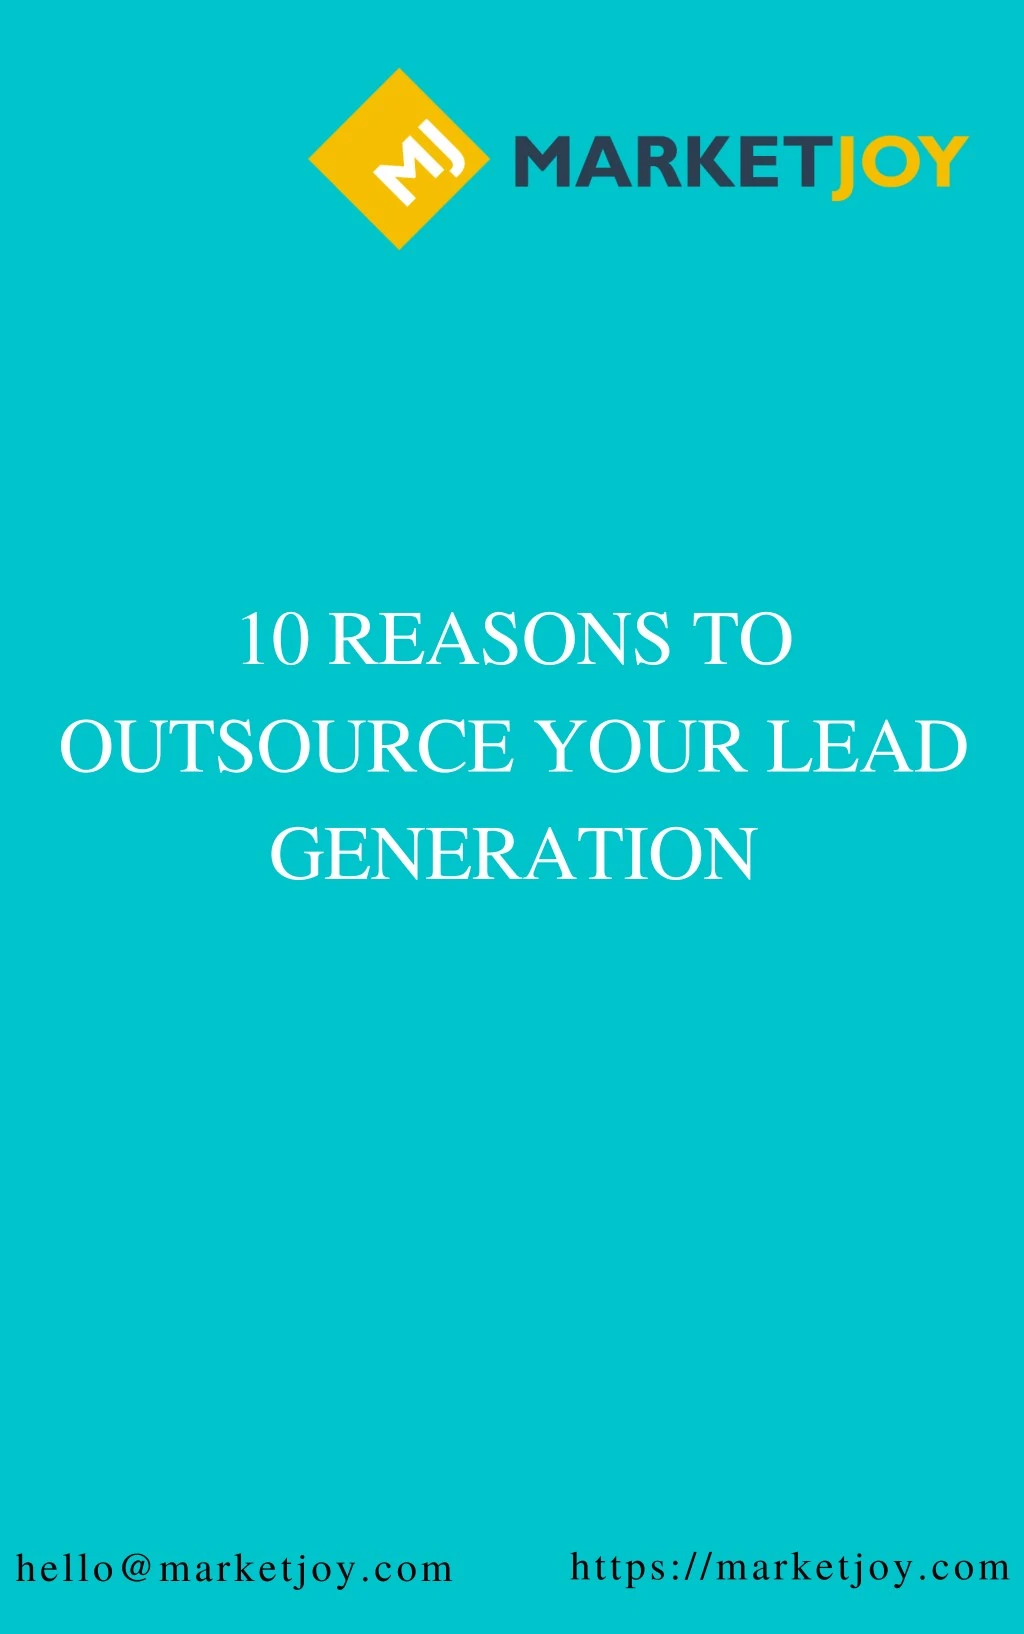 10 reasons to outsource your lead generation